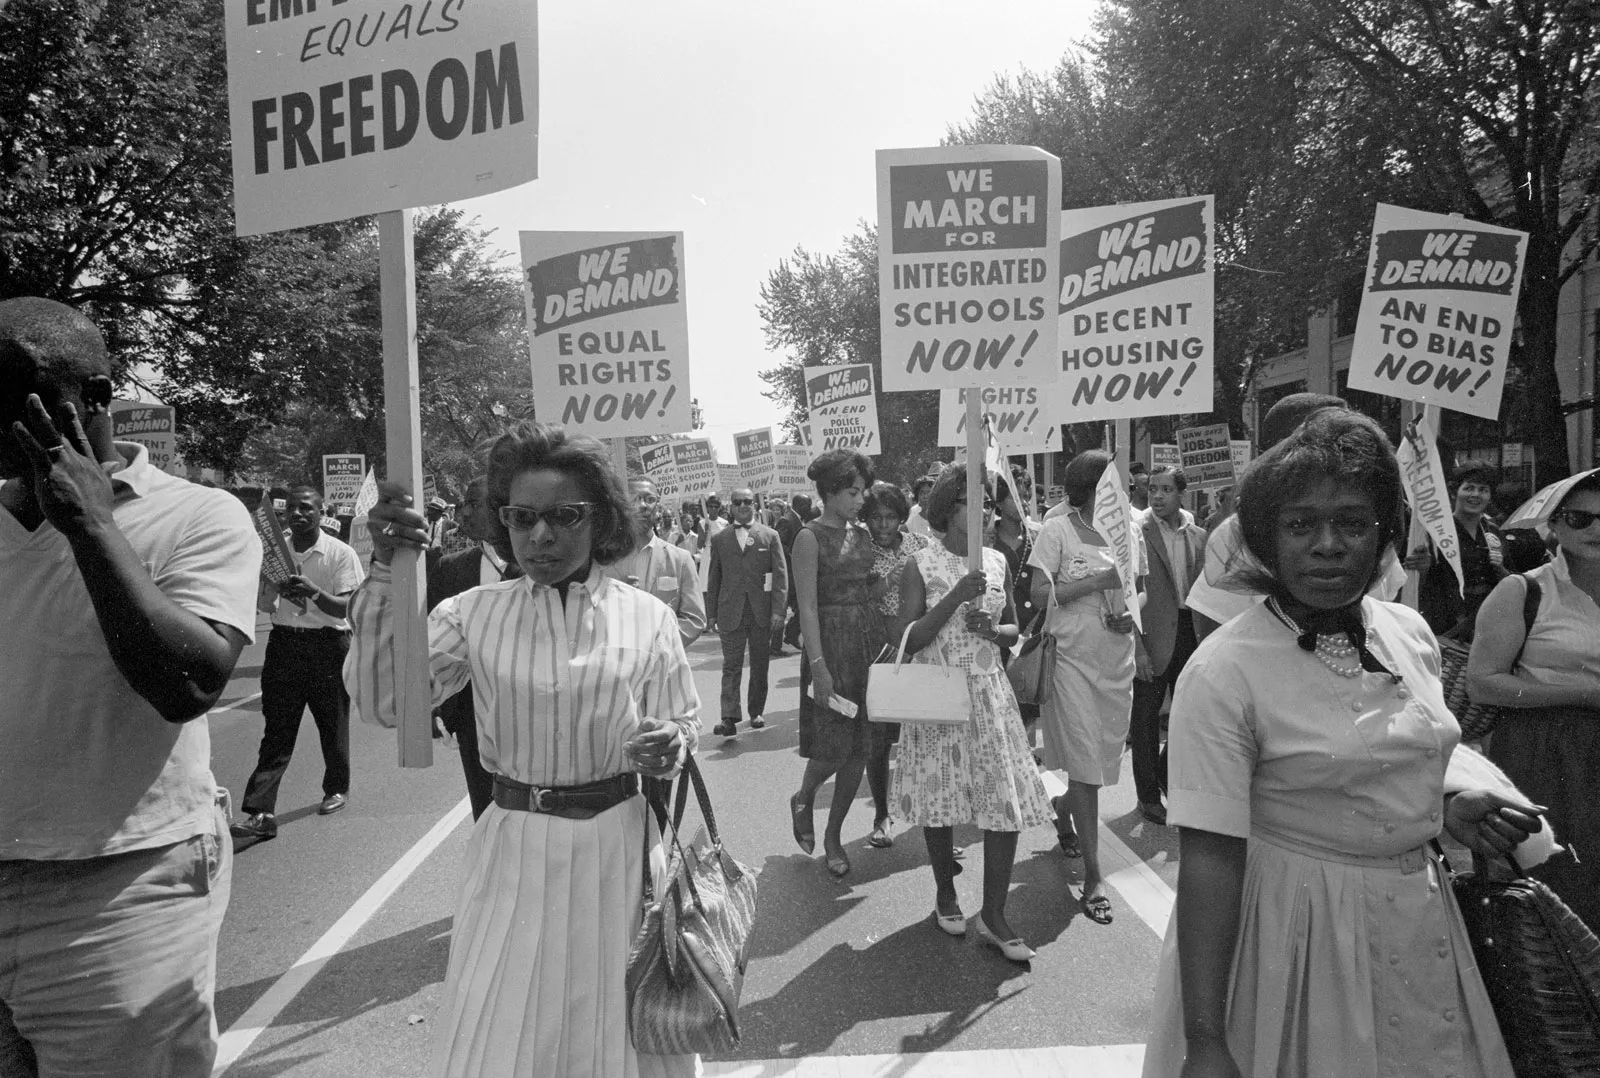 supporters-rights-placards-Washington-DC-August-28-1963.jpeg 